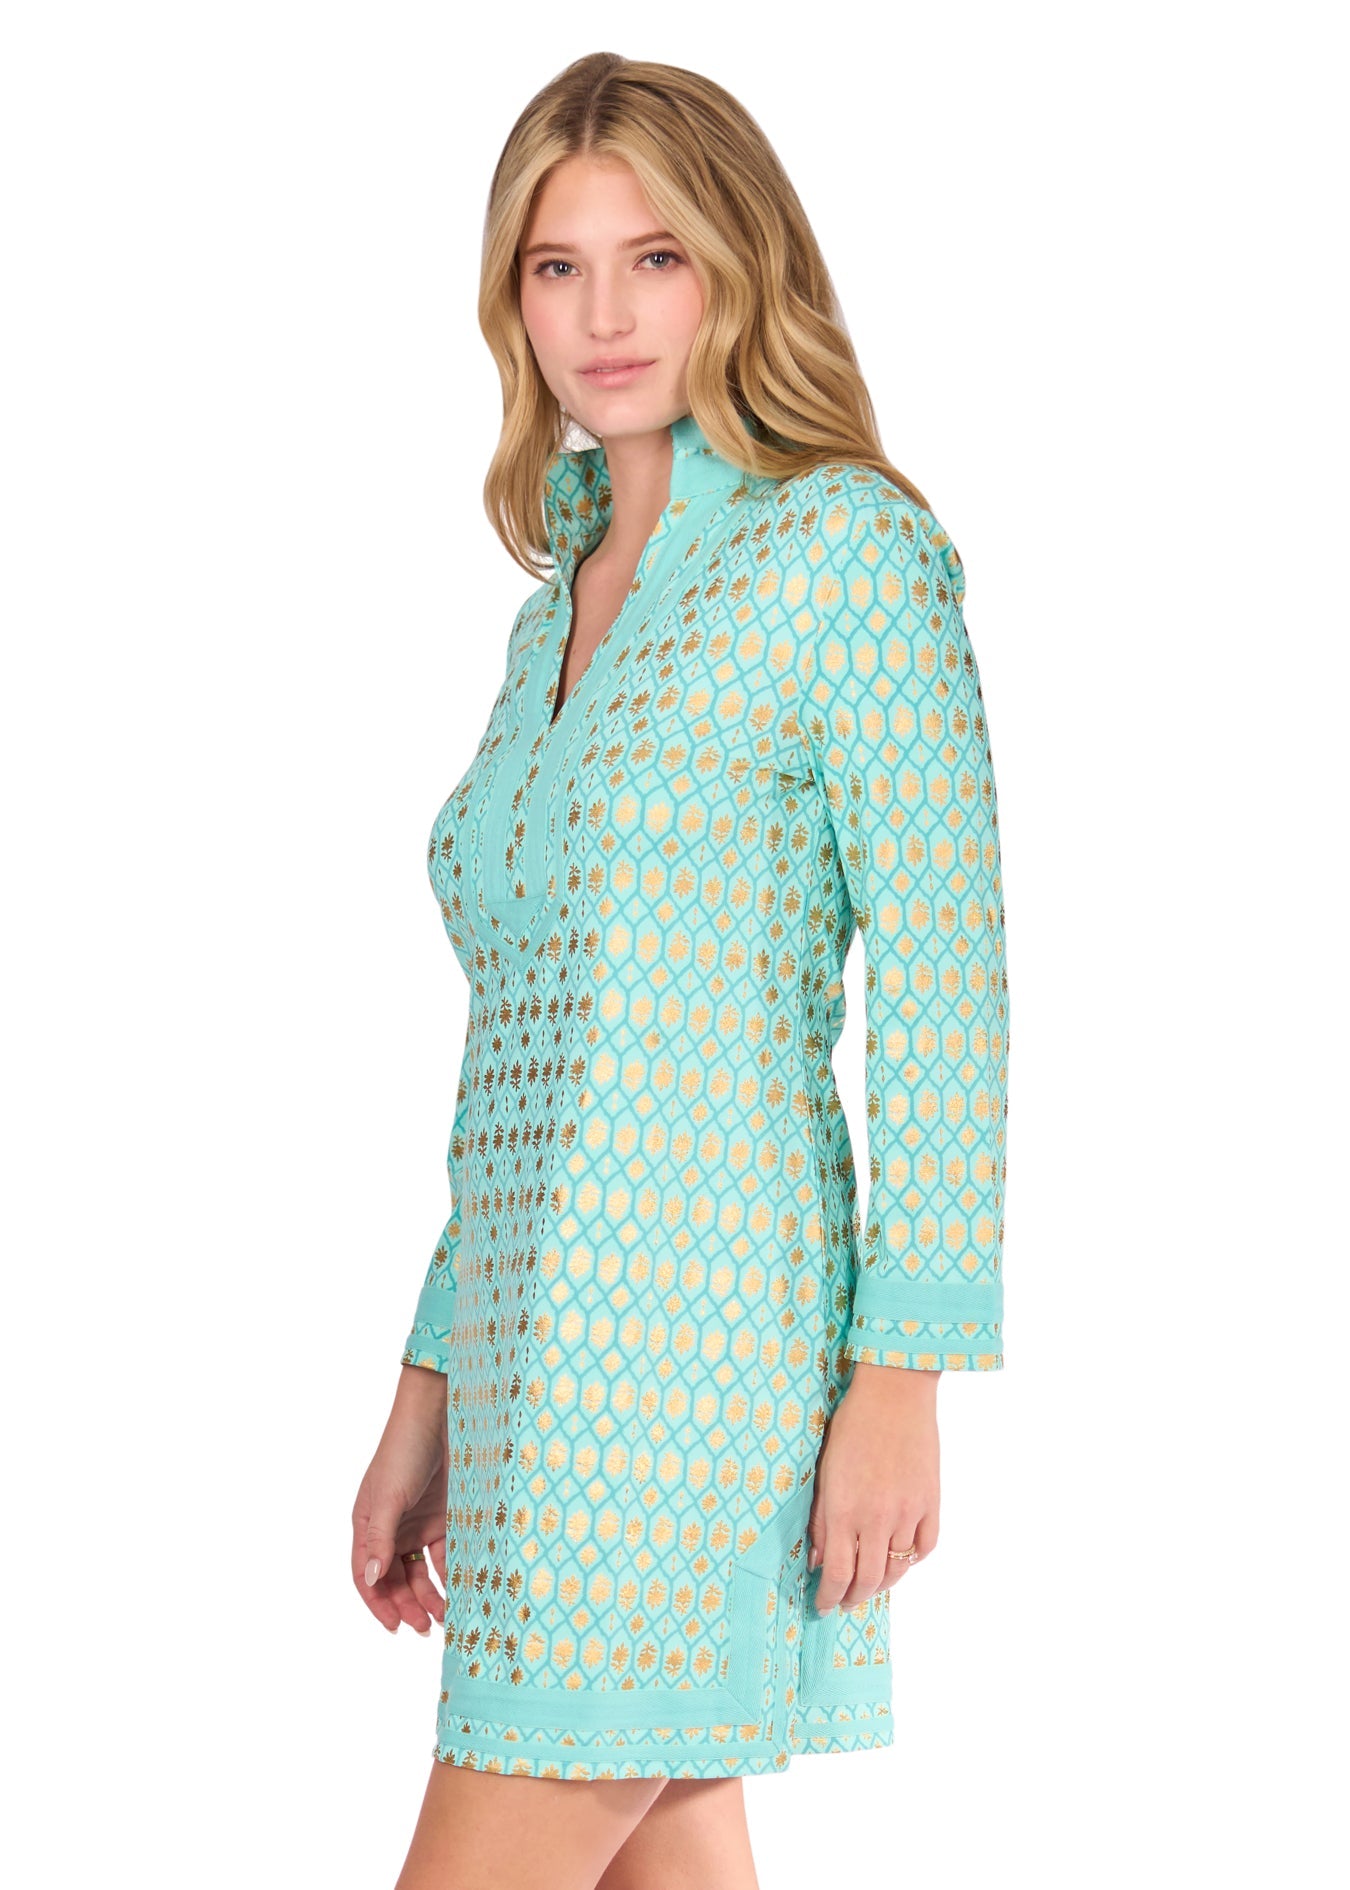 The side of a blonde woman wearing the Aqua Metallic Tunic Dress on a white background.